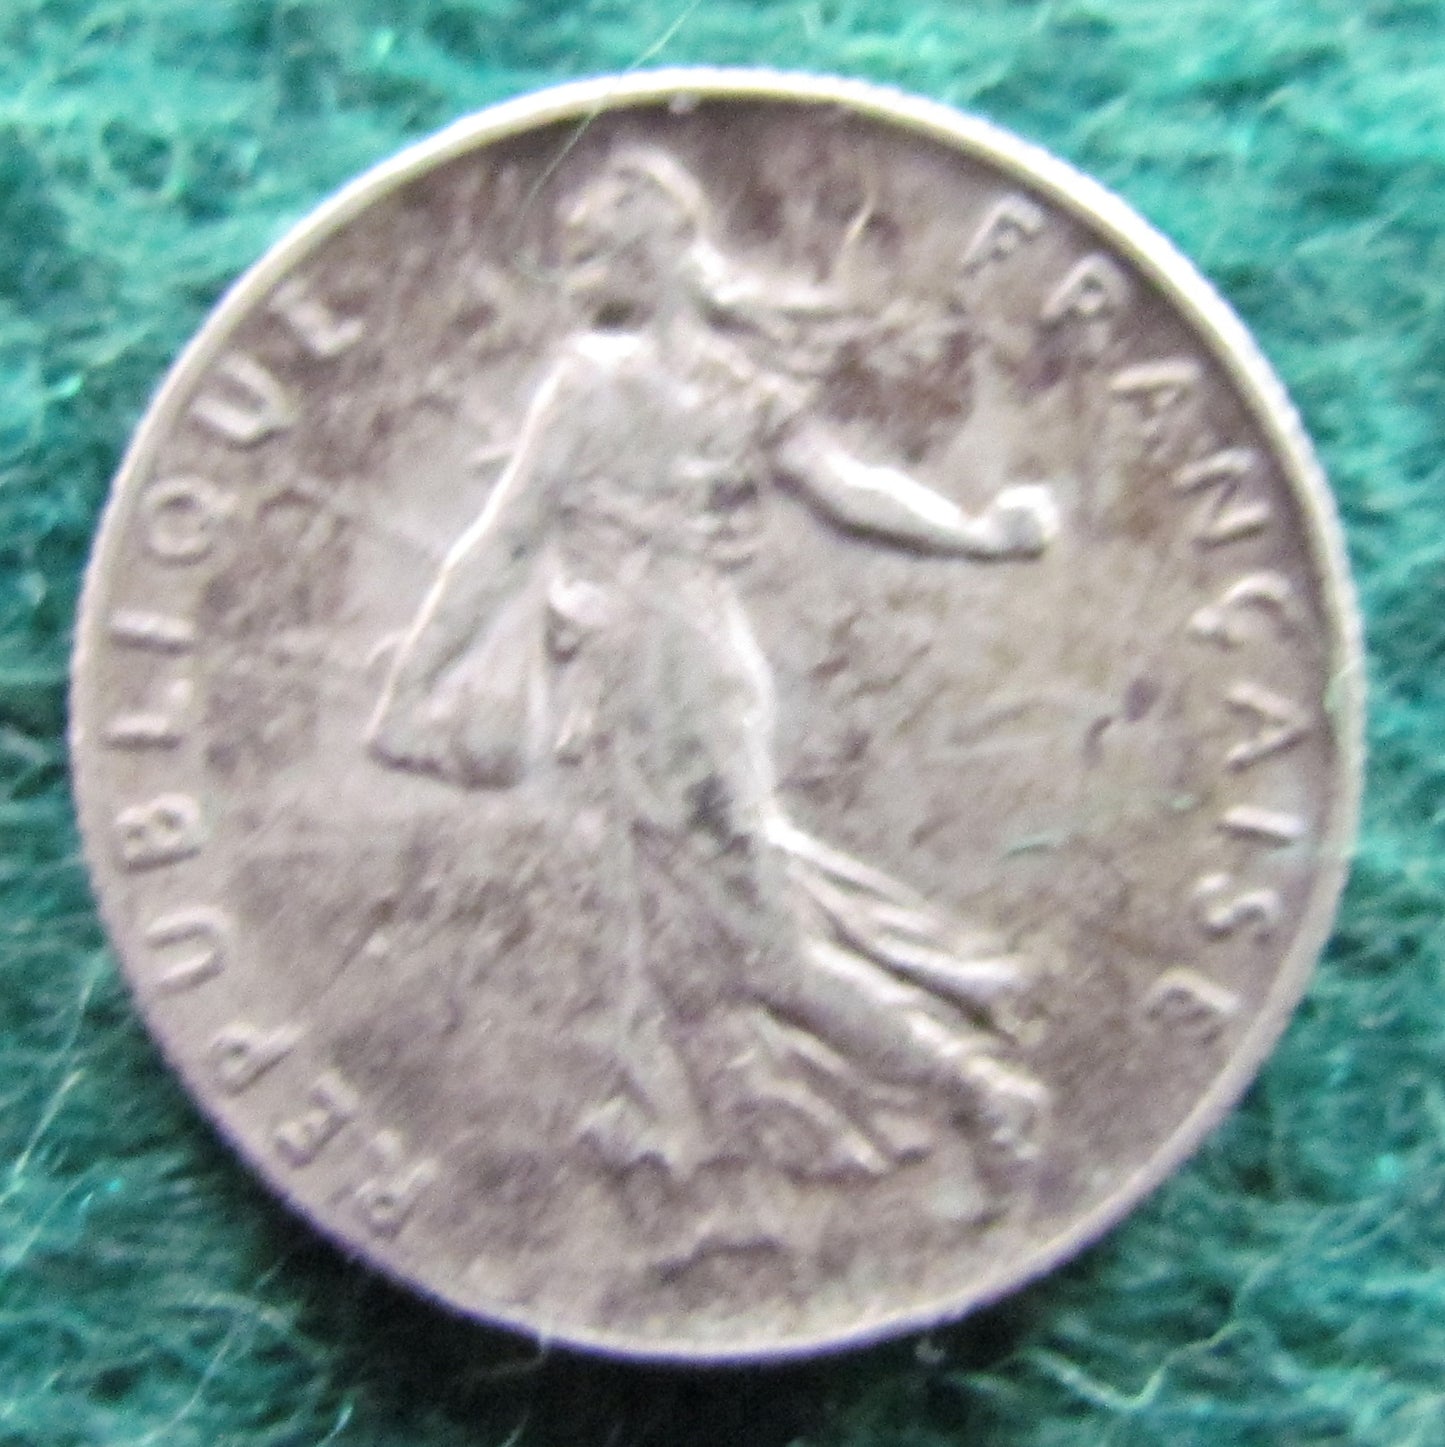 French 1916 50 Centimes Coin - Circulated